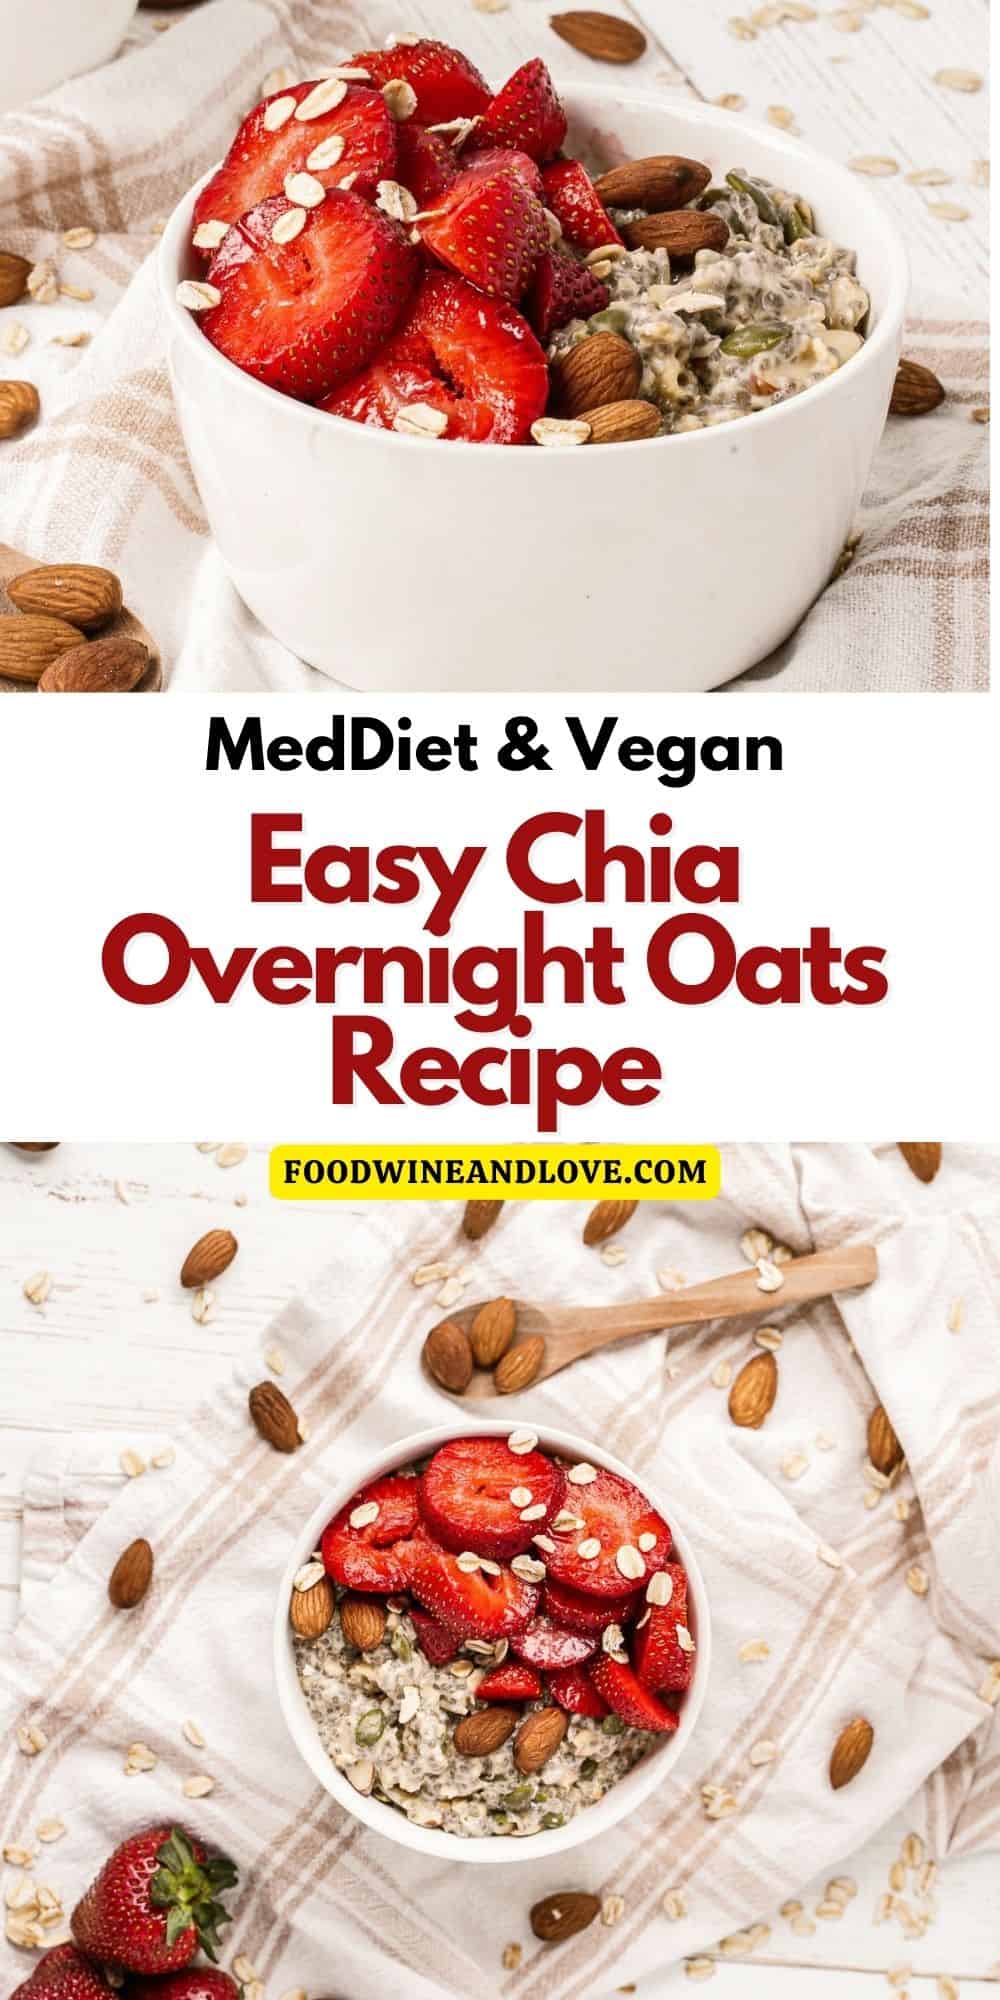 Easy Chia Overnight Oats Recipe, a healthy, simple, and delicious breakfast recipe idea made with fresh fruit. Vegan, GF, Mediterranean diet.